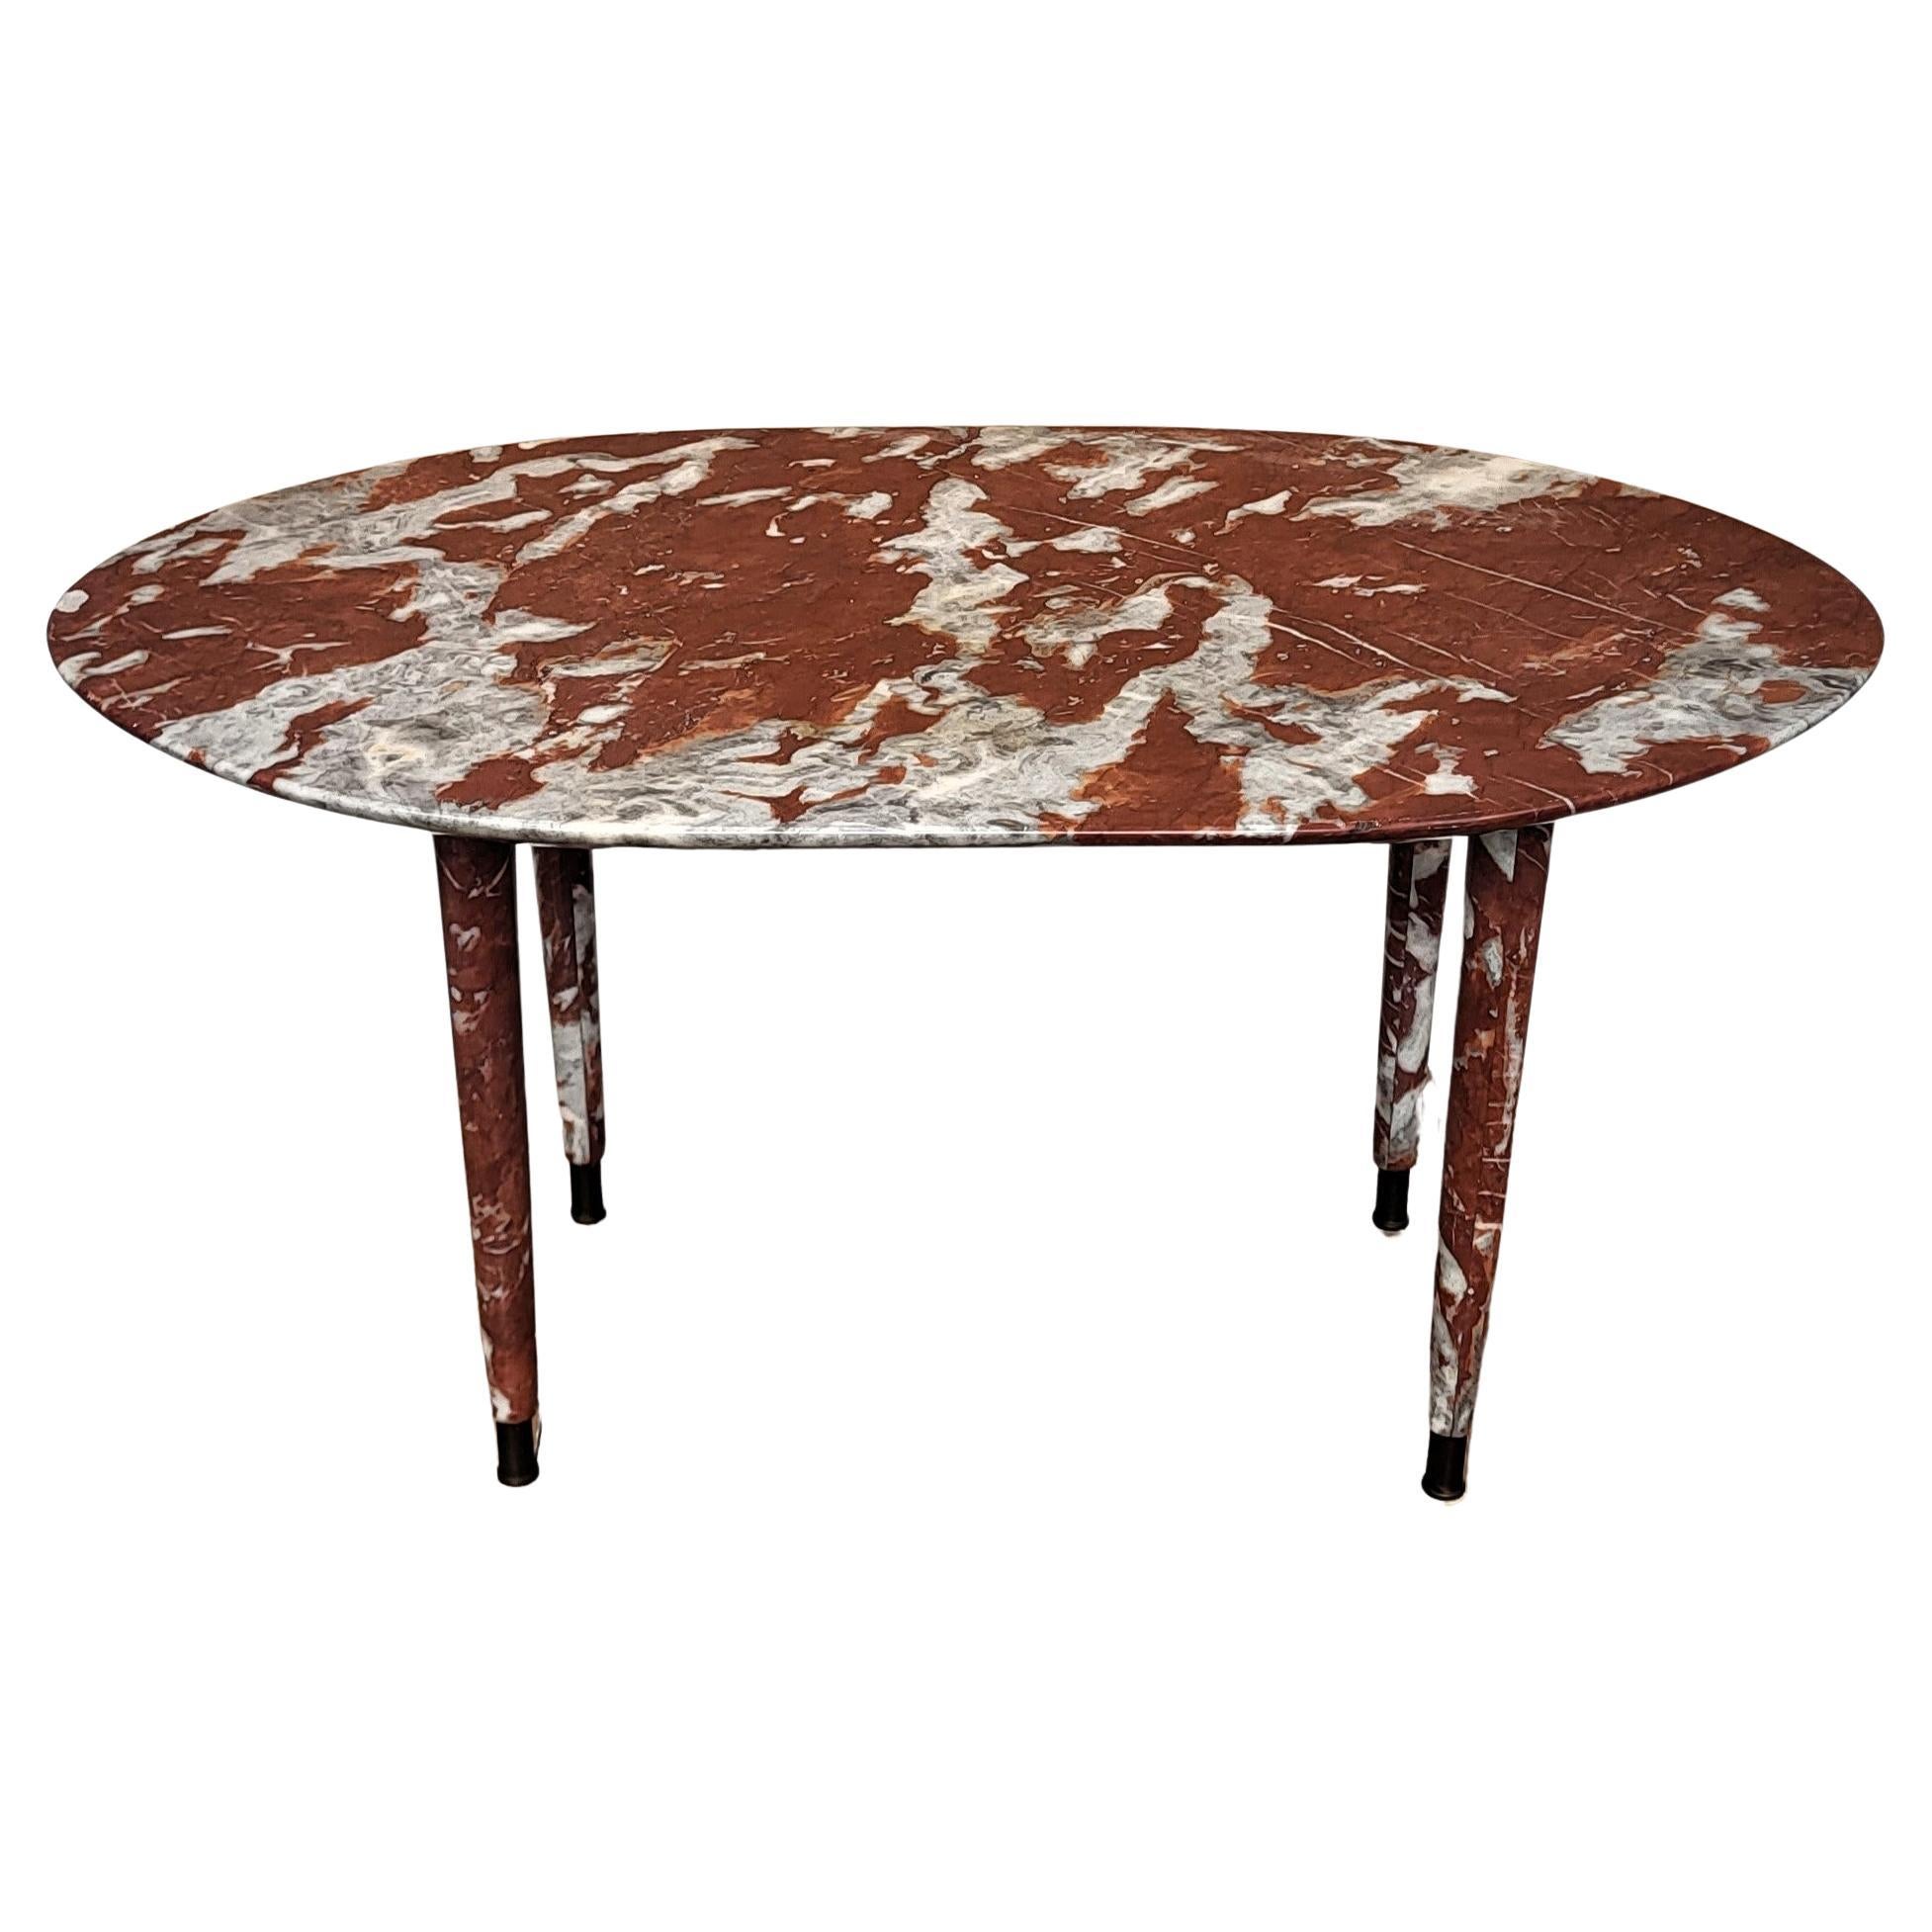 20th Century Italian Red Levanto Marble Oval Coffee Side Table  For Sale